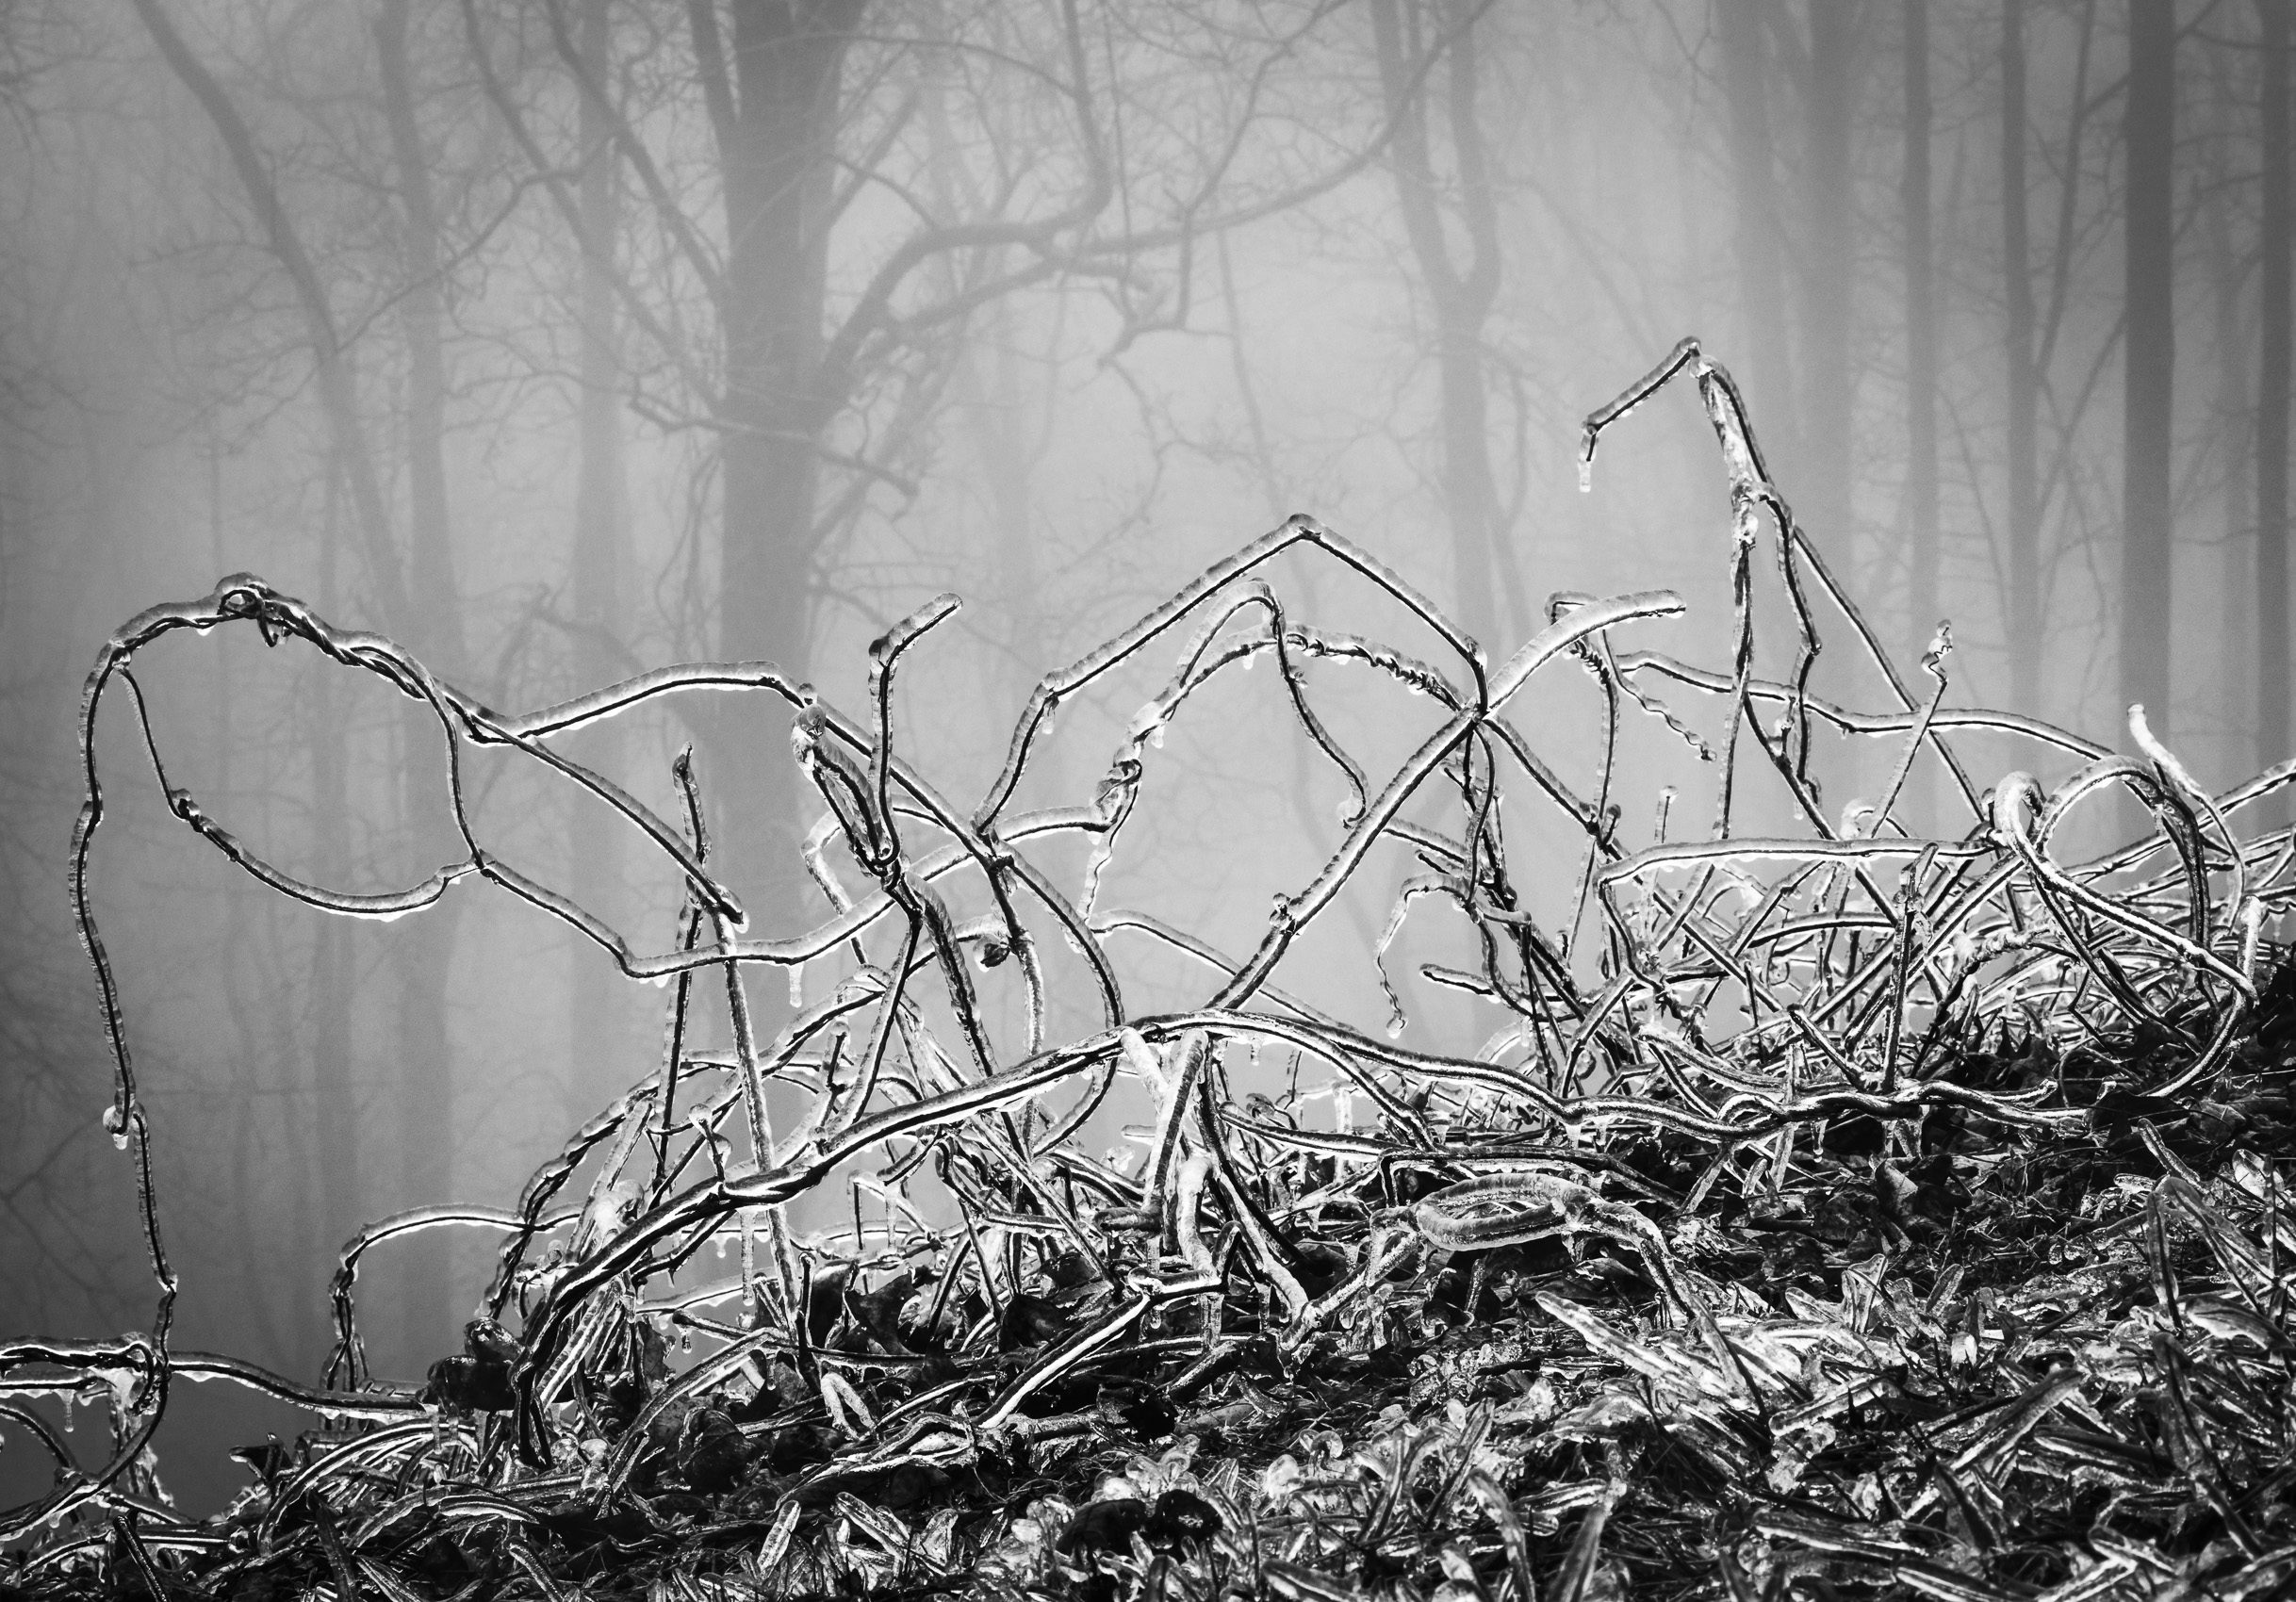 Monochrome image of ice-coated twigs and grasses, occurring as the consequence of an ice storm, against a background of trees through the mist. NC018